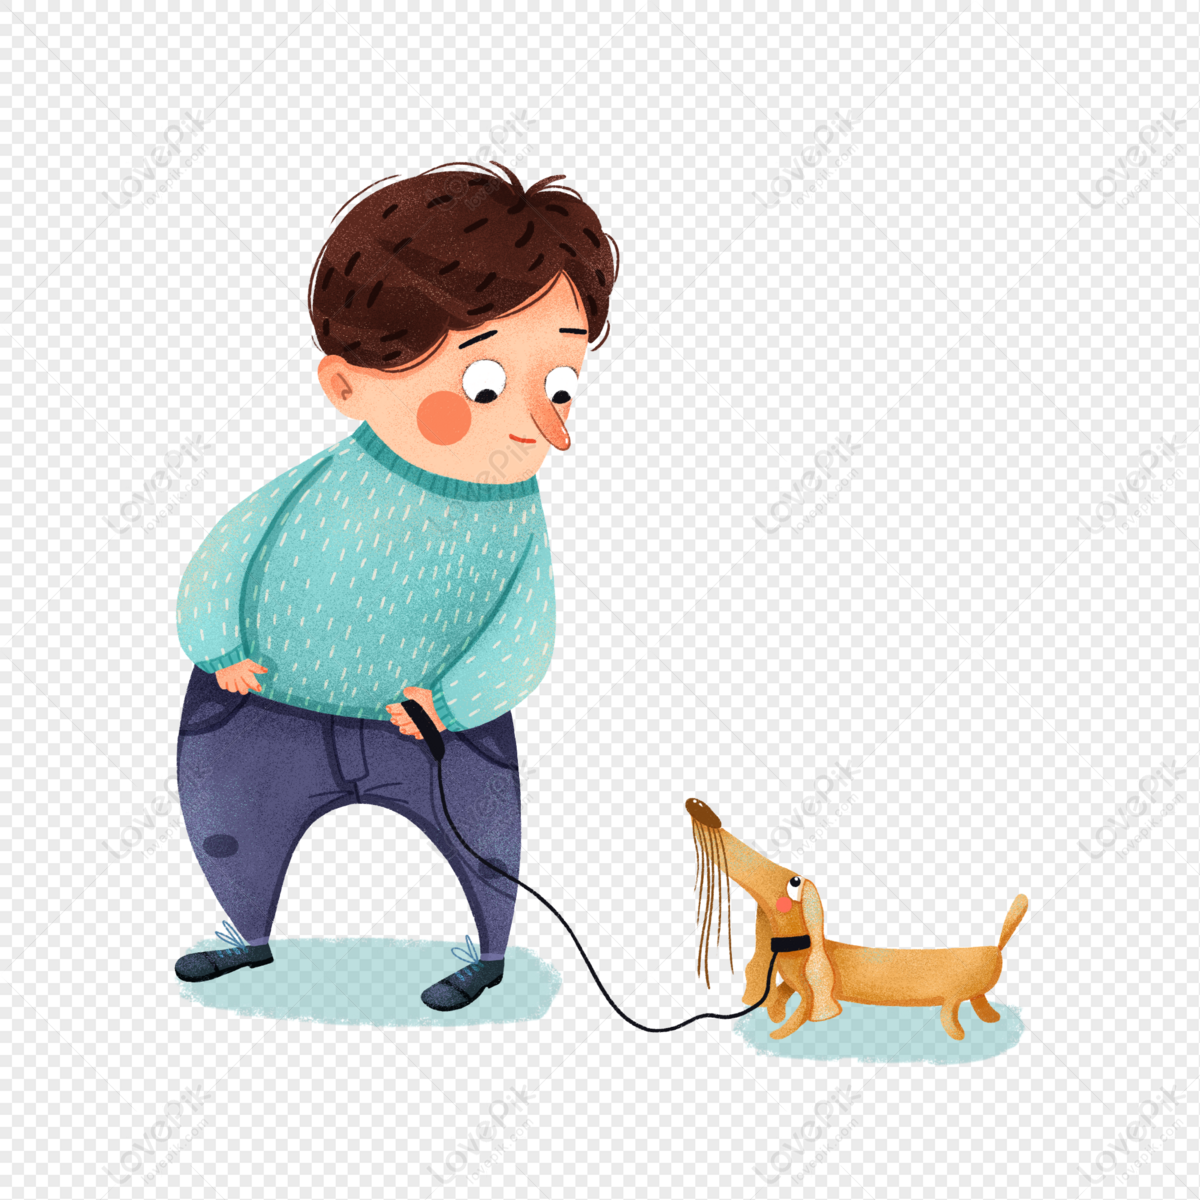 Little Boy Walking The Dog Png Transparent And Clipart Image For Free  Download - Lovepik | 401420366